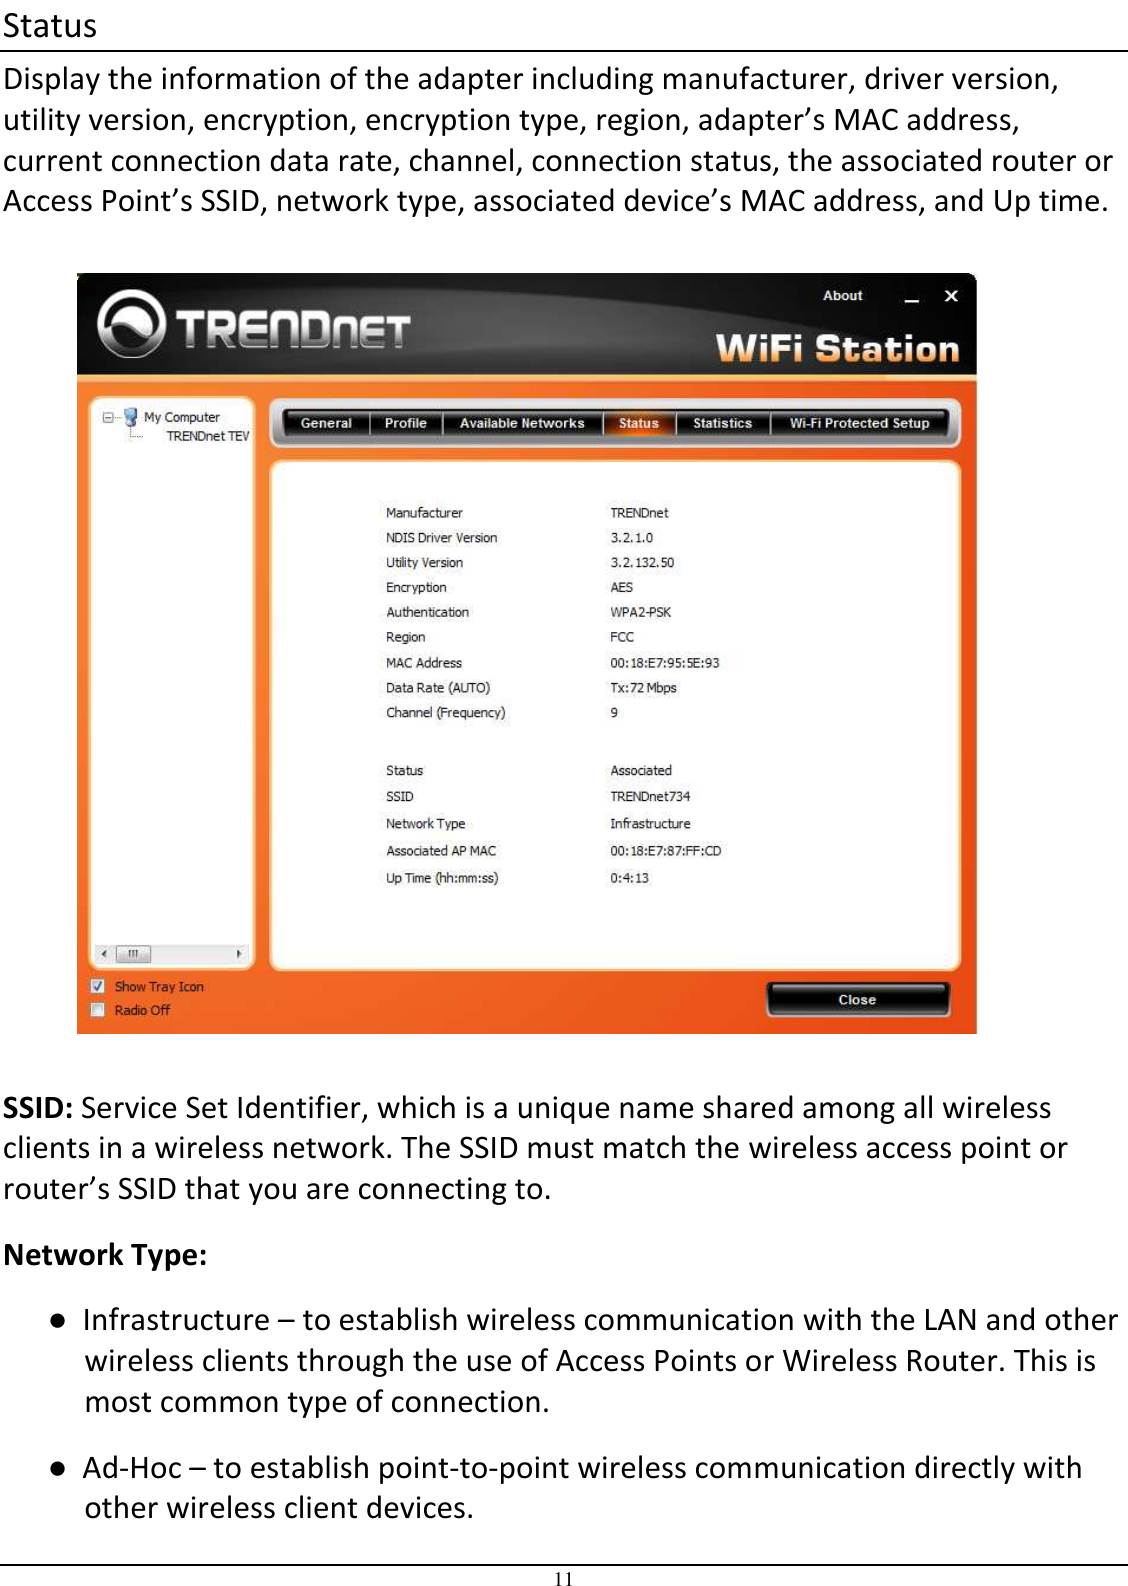 11 Status Display the information of the adapter including manufacturer, driver version, utility version, encryption, encryption type, region, adapter’s MAC address, current connection data rate, channel, connection status, the associated router or Access Point’s SSID, network type, associated device’s MAC address, and Up time.    SSID: Service Set Identifier, which is a unique name shared among all wireless clients in a wireless network. The SSID must match the wireless access point or router’s SSID that you are connecting to.  Network Type:  ●  Infrastructure – to establish wireless communication with the LAN and other wireless clients through the use of Access Points or Wireless Router. This is most common type of connection.  ●  Ad-Hoc – to establish point-to-point wireless communication directly with other wireless client devices. 